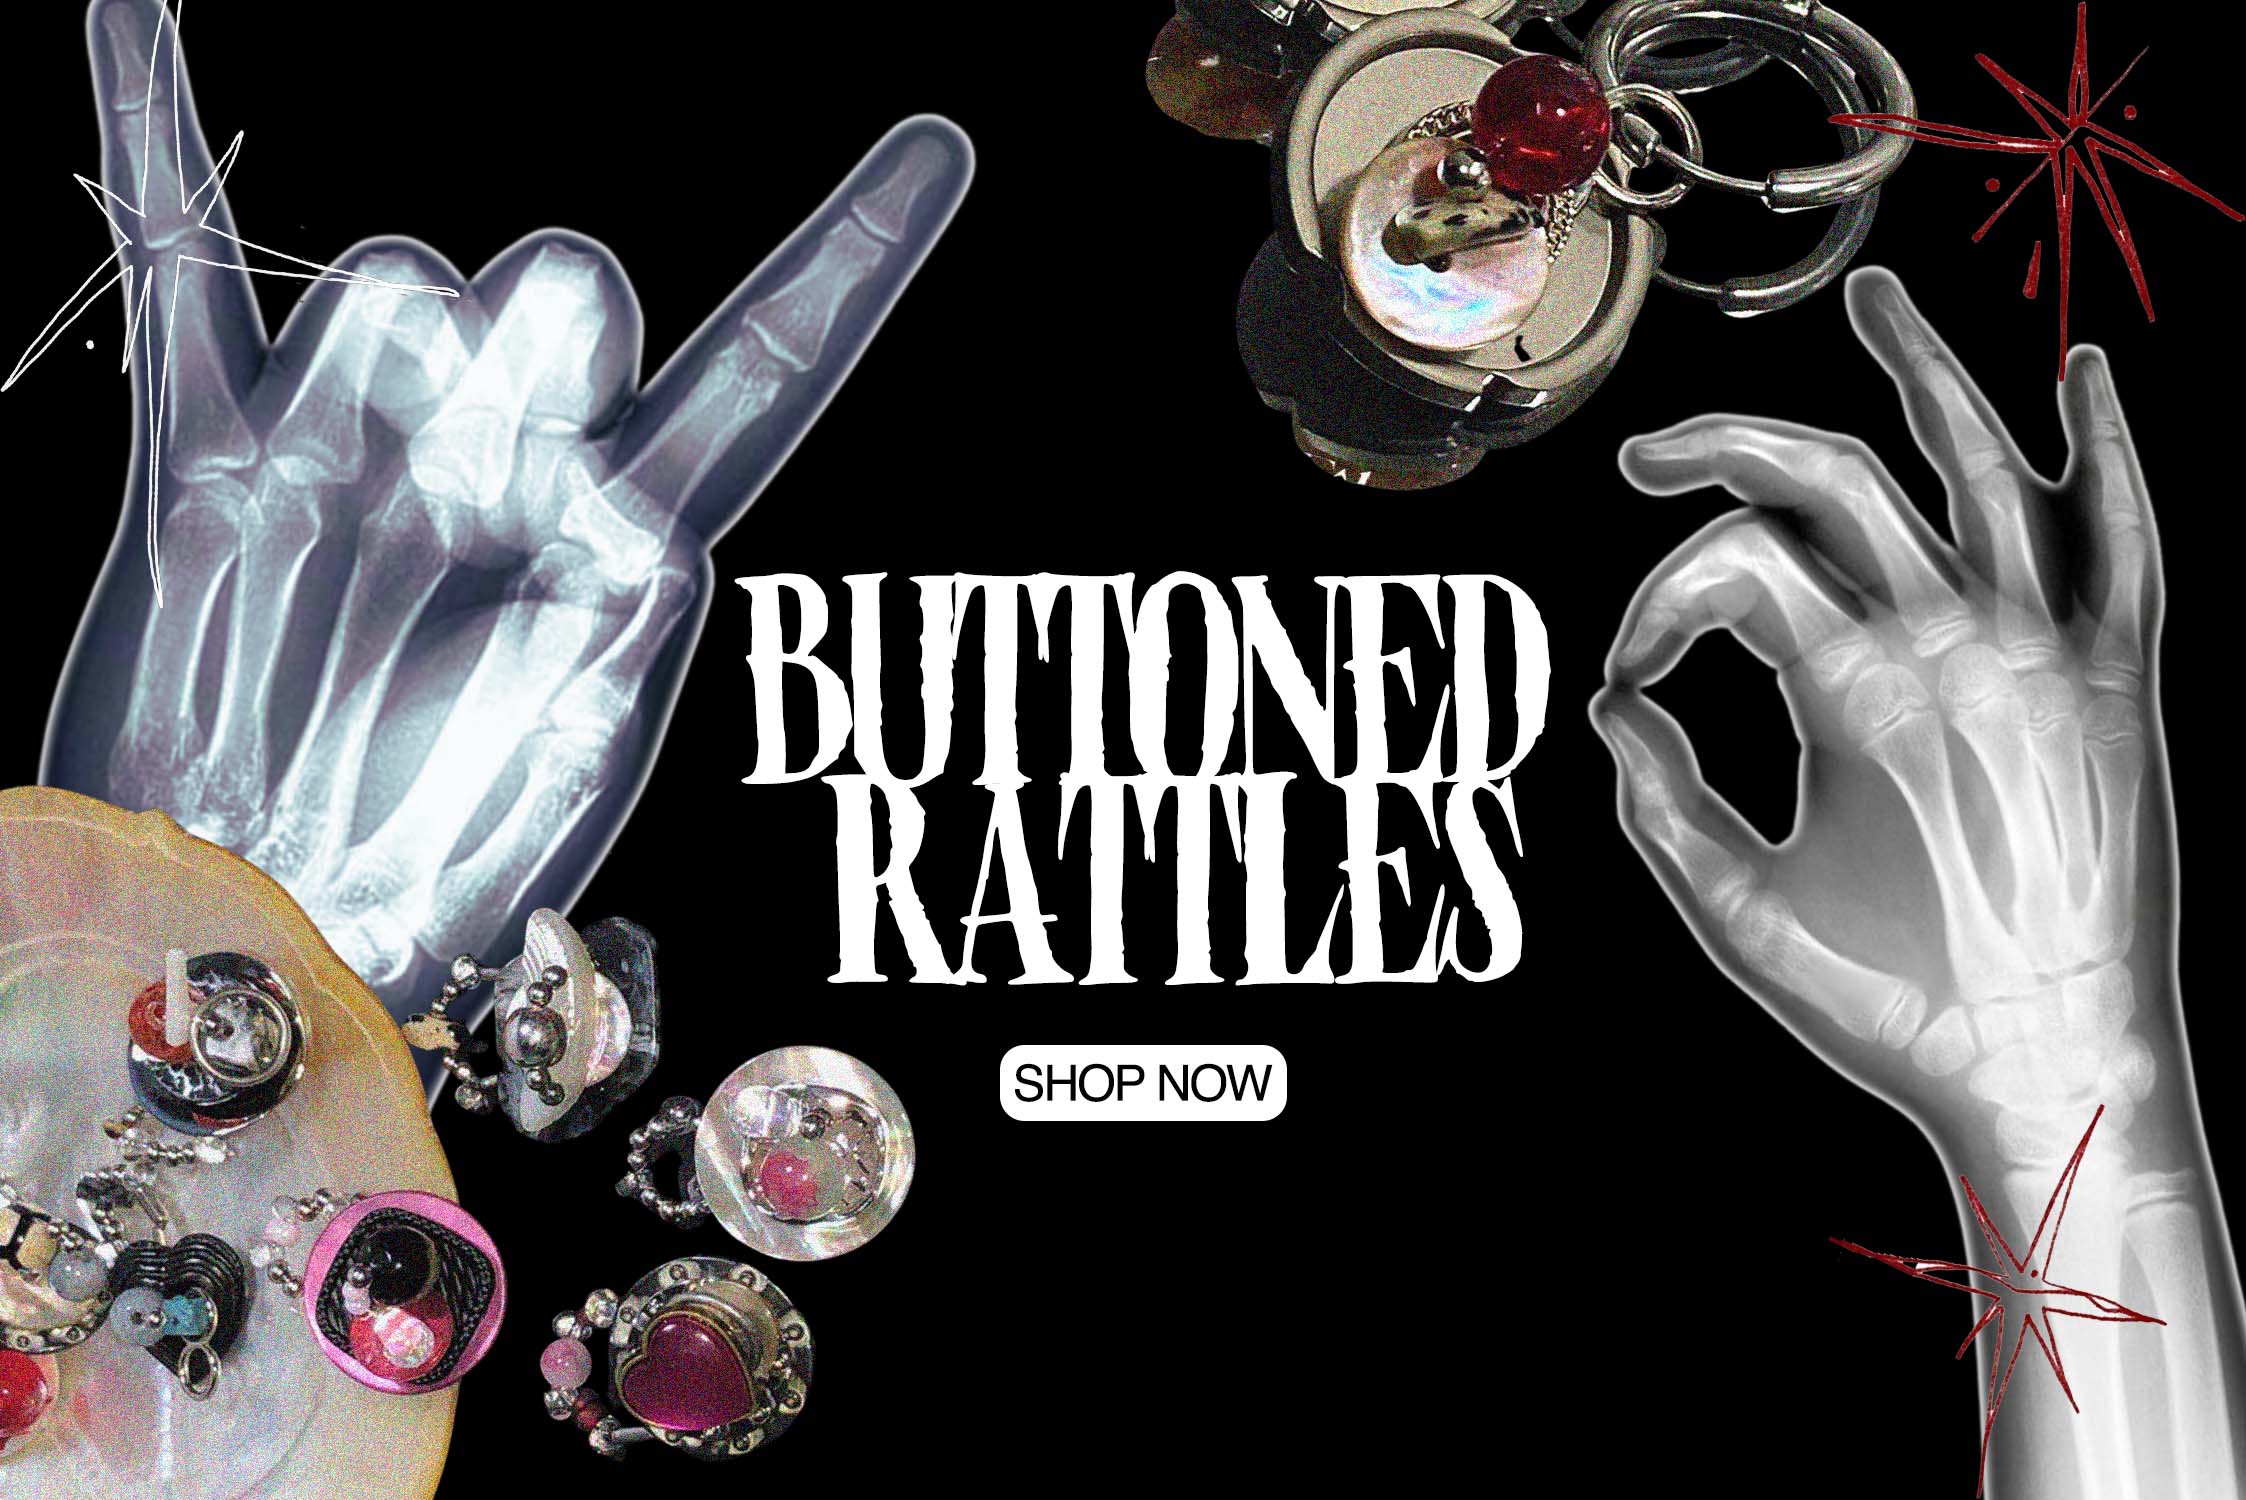 Buttoned Rattles-New drop from Öddsome